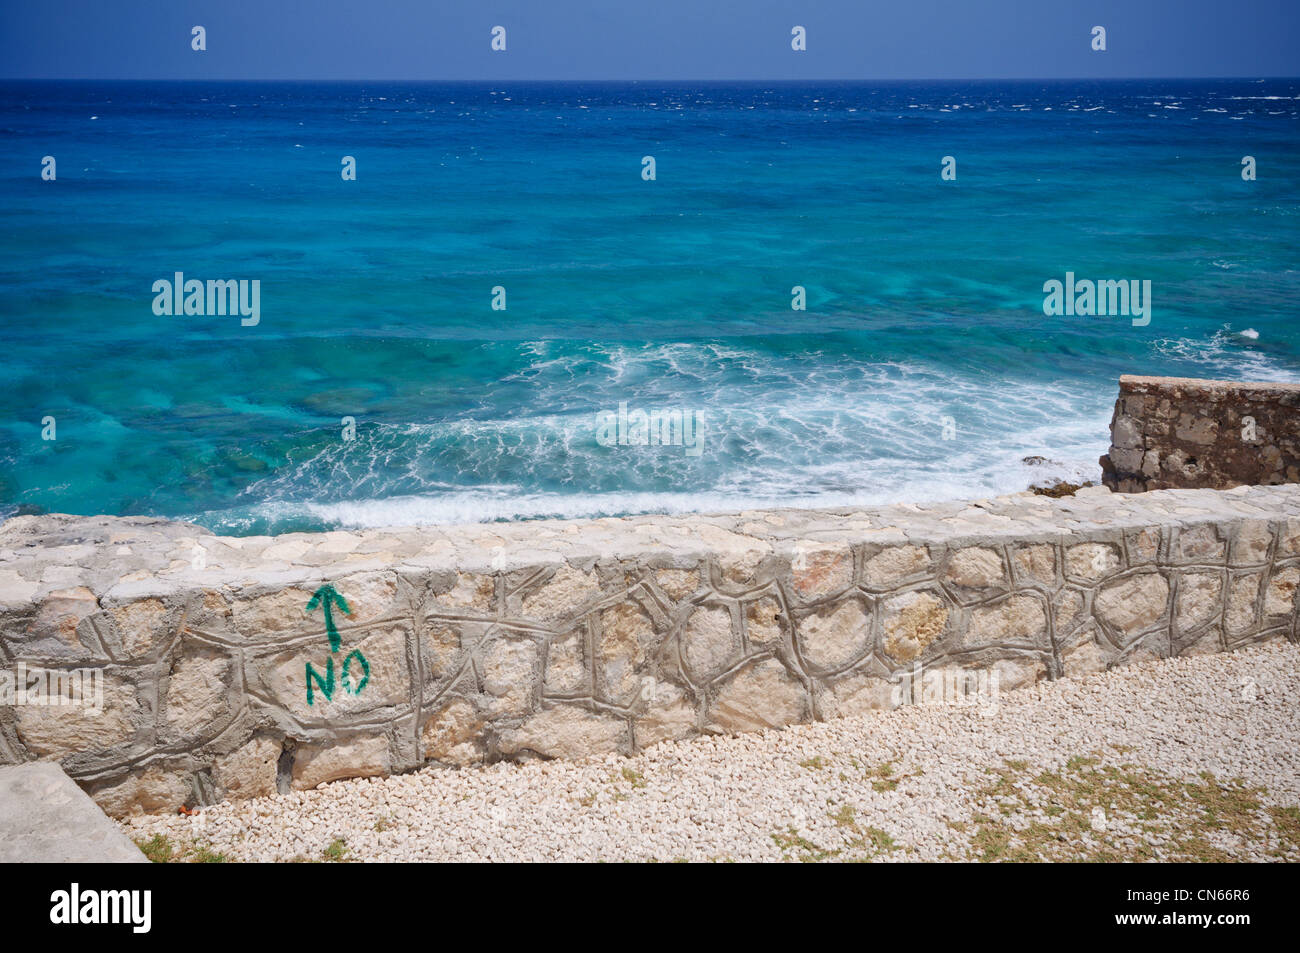 The view at Punta Sur, Isla Mujeres, Mexico Stock Photo